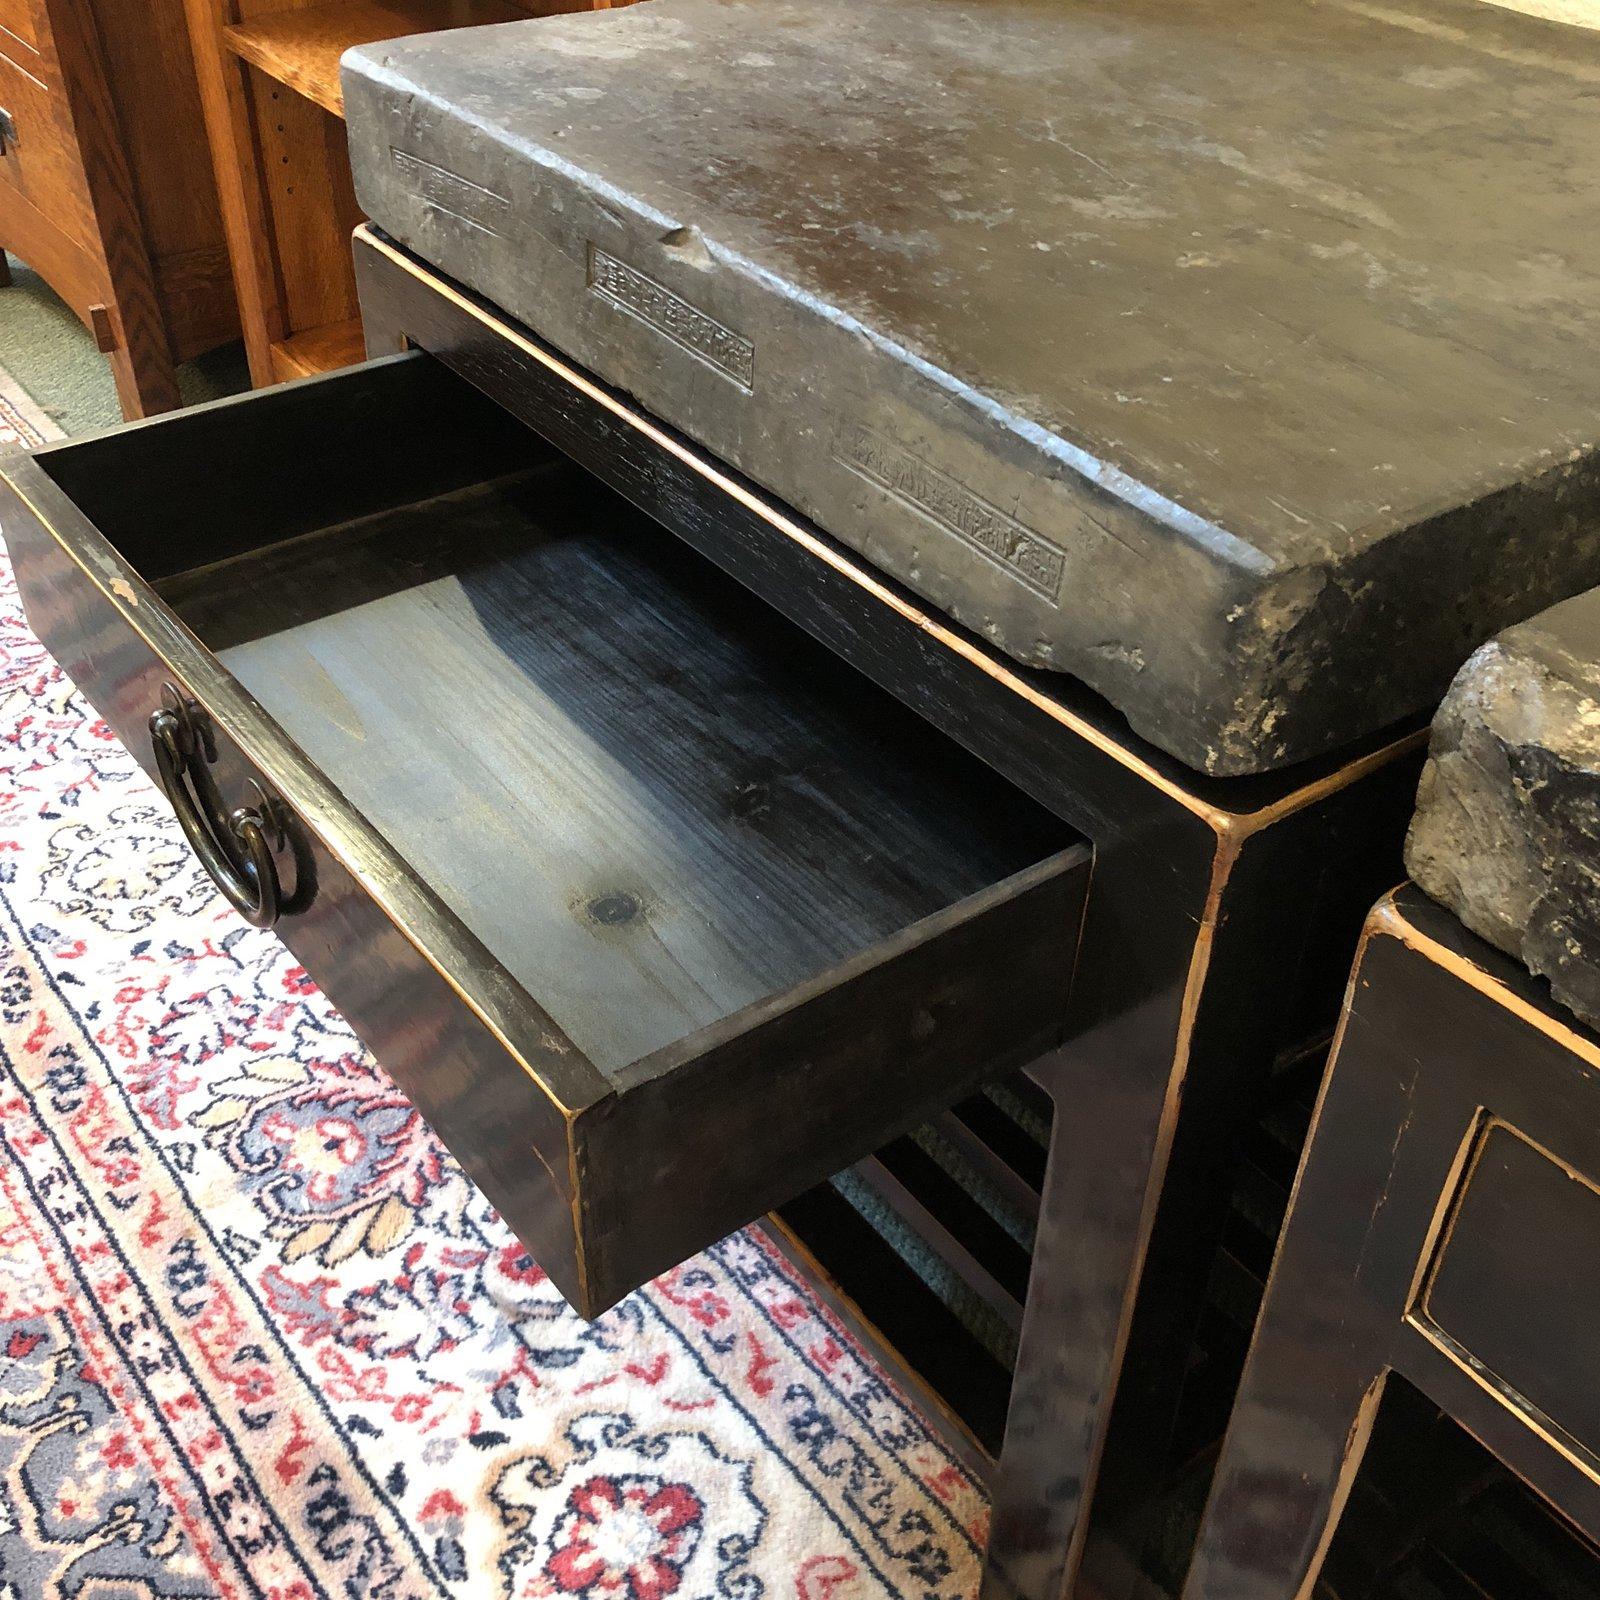 Two antique Chinese end tables with stone tops. Each piece features a slatted lower shelf, pull drawer, and bronze hardware. There is minor wear as may be expected with carved stones already rustic in nature.

Original price: $5,000.00.